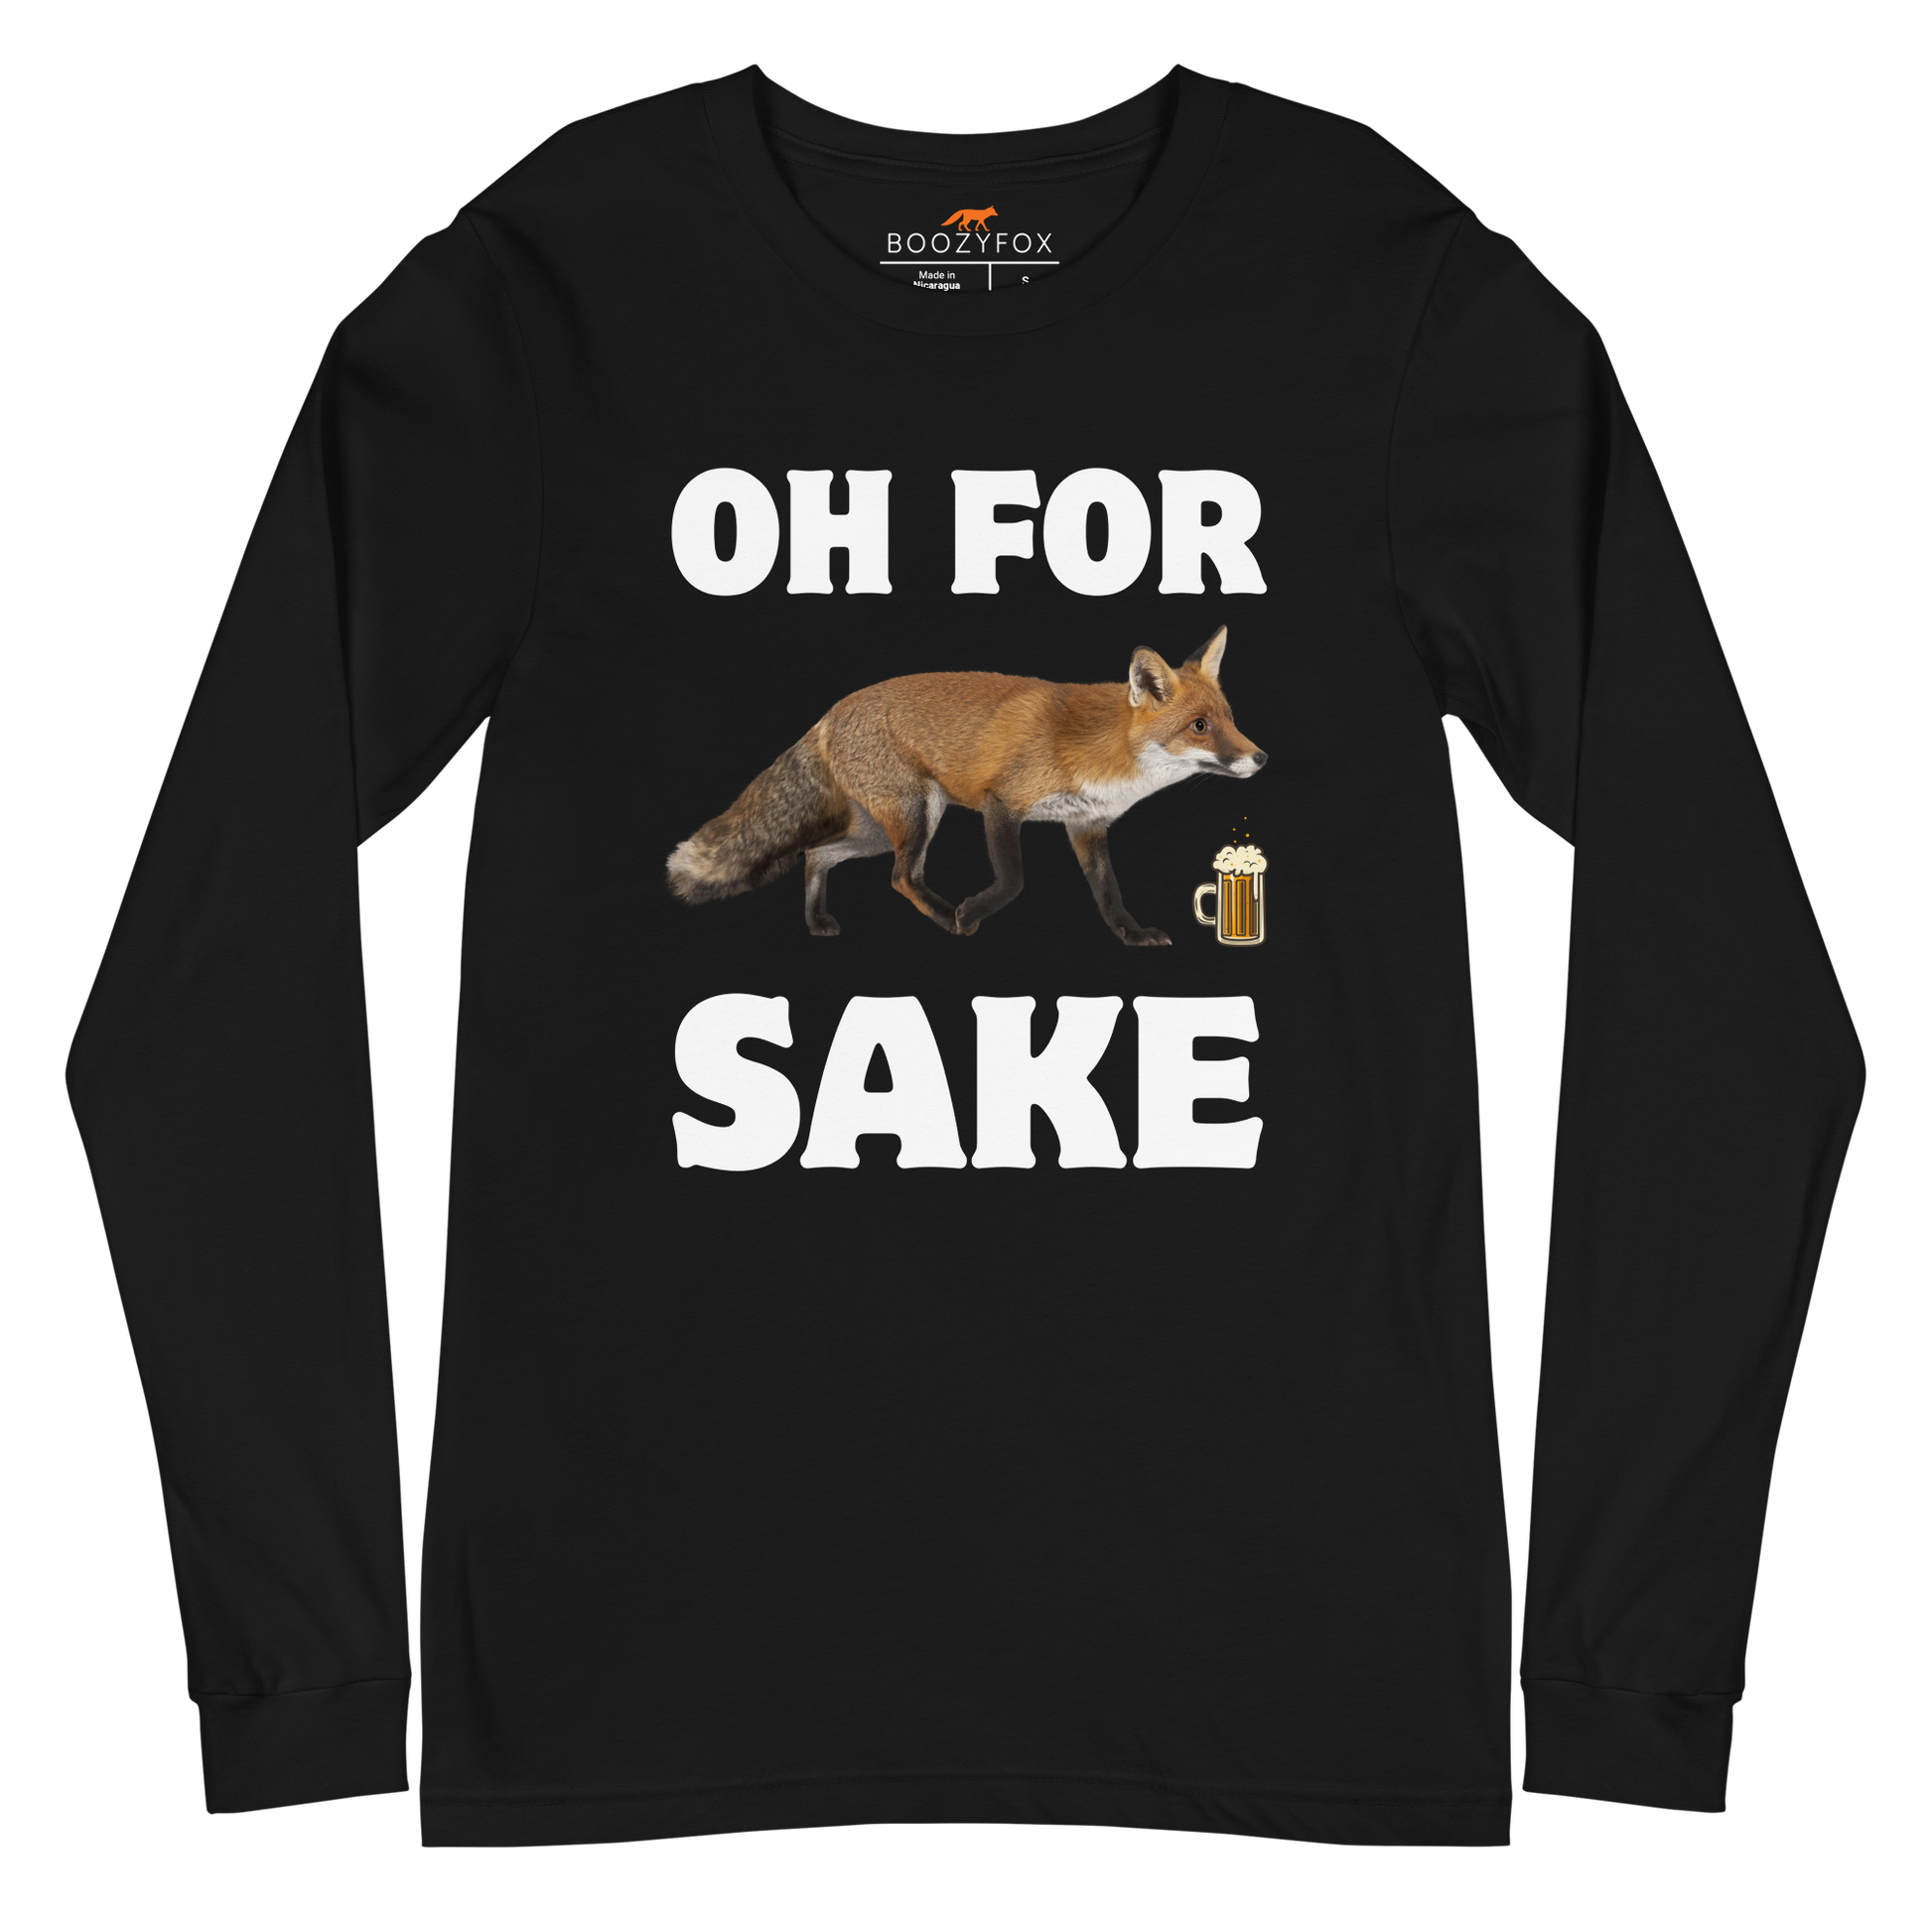 Black Fox Long Sleeve Tee featuring a Oh For Fox Sake graphic on the chest - Funny Fox Long Sleeve Graphic Tees - Boozy Fox